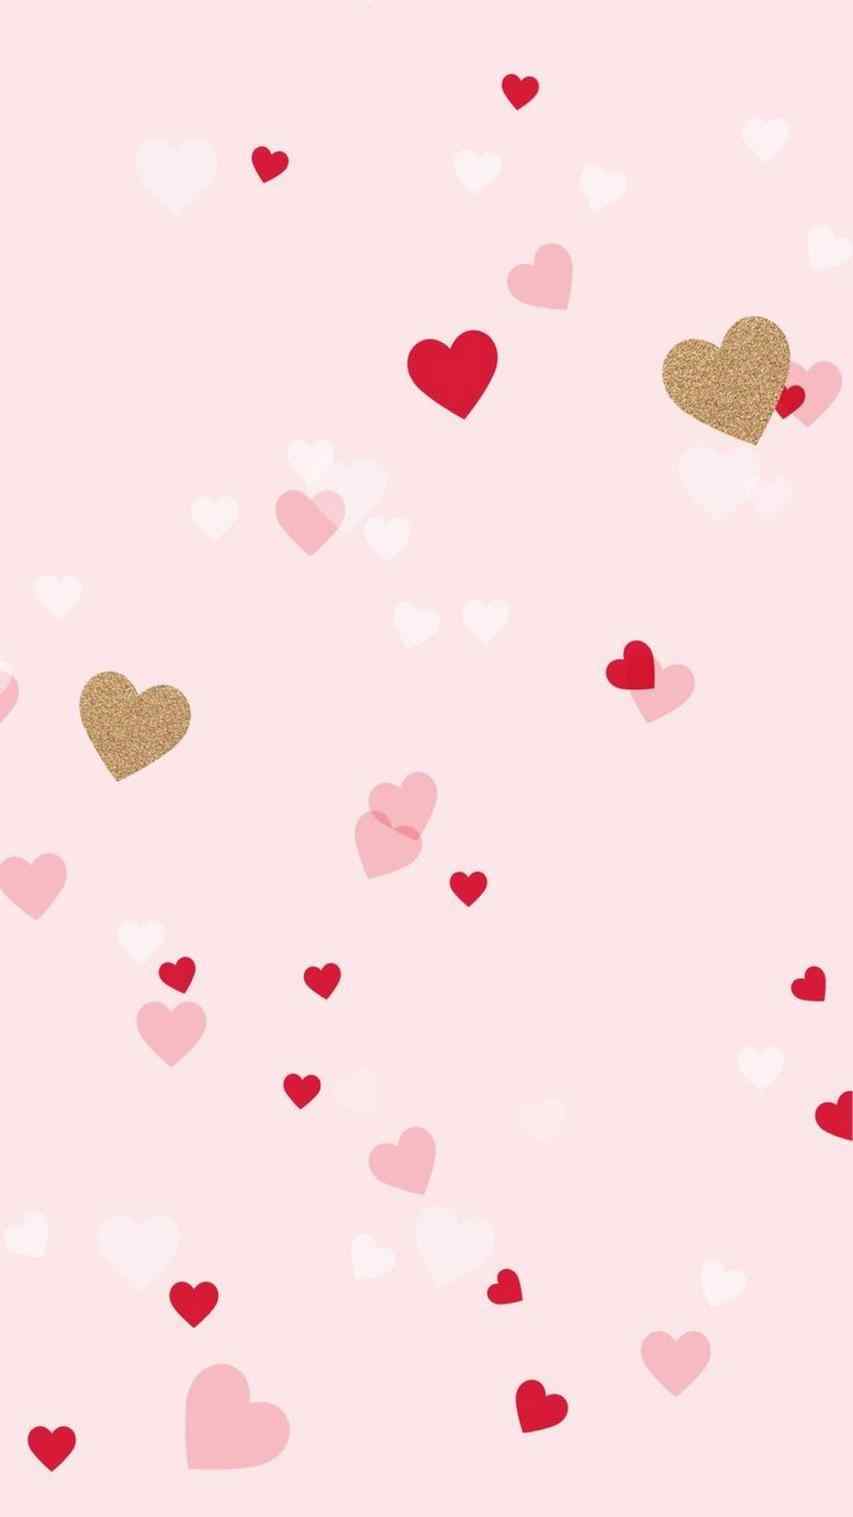 65 Cute Valentines Day Wallpapers For iPhone Free Download  Valentines  wallpaper Valentines wallpaper iphone Valentines